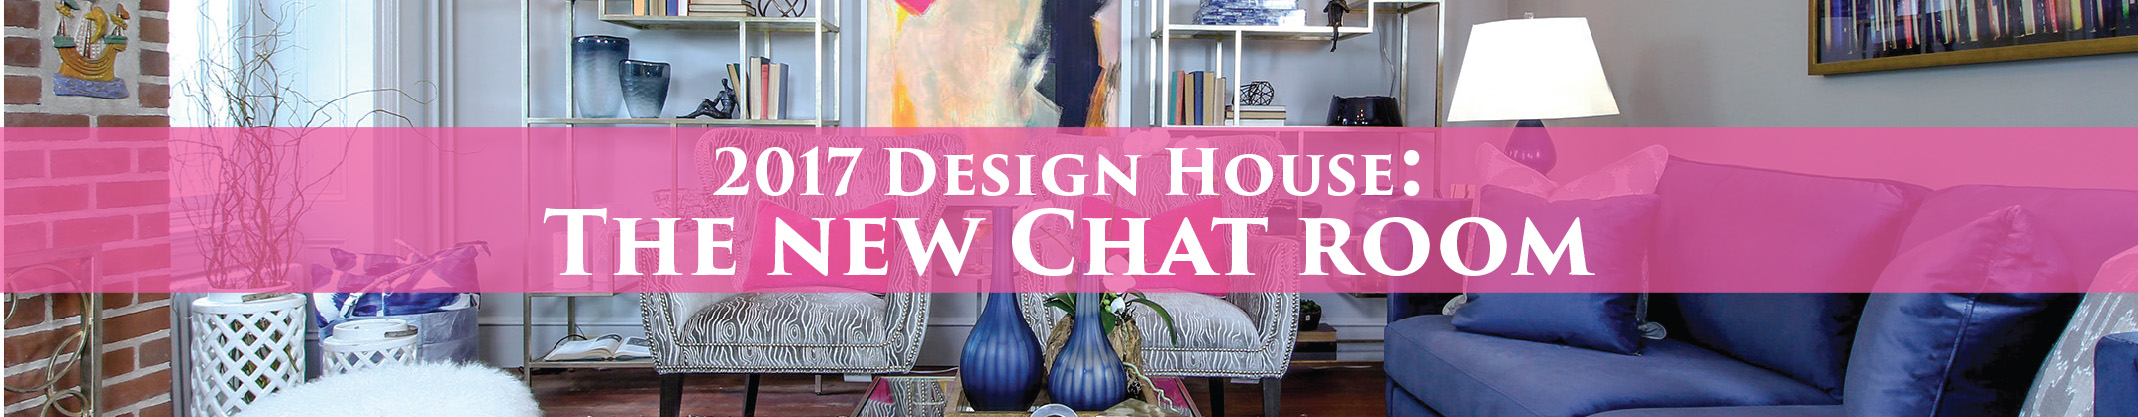 The New Chat Room: Design House 2017